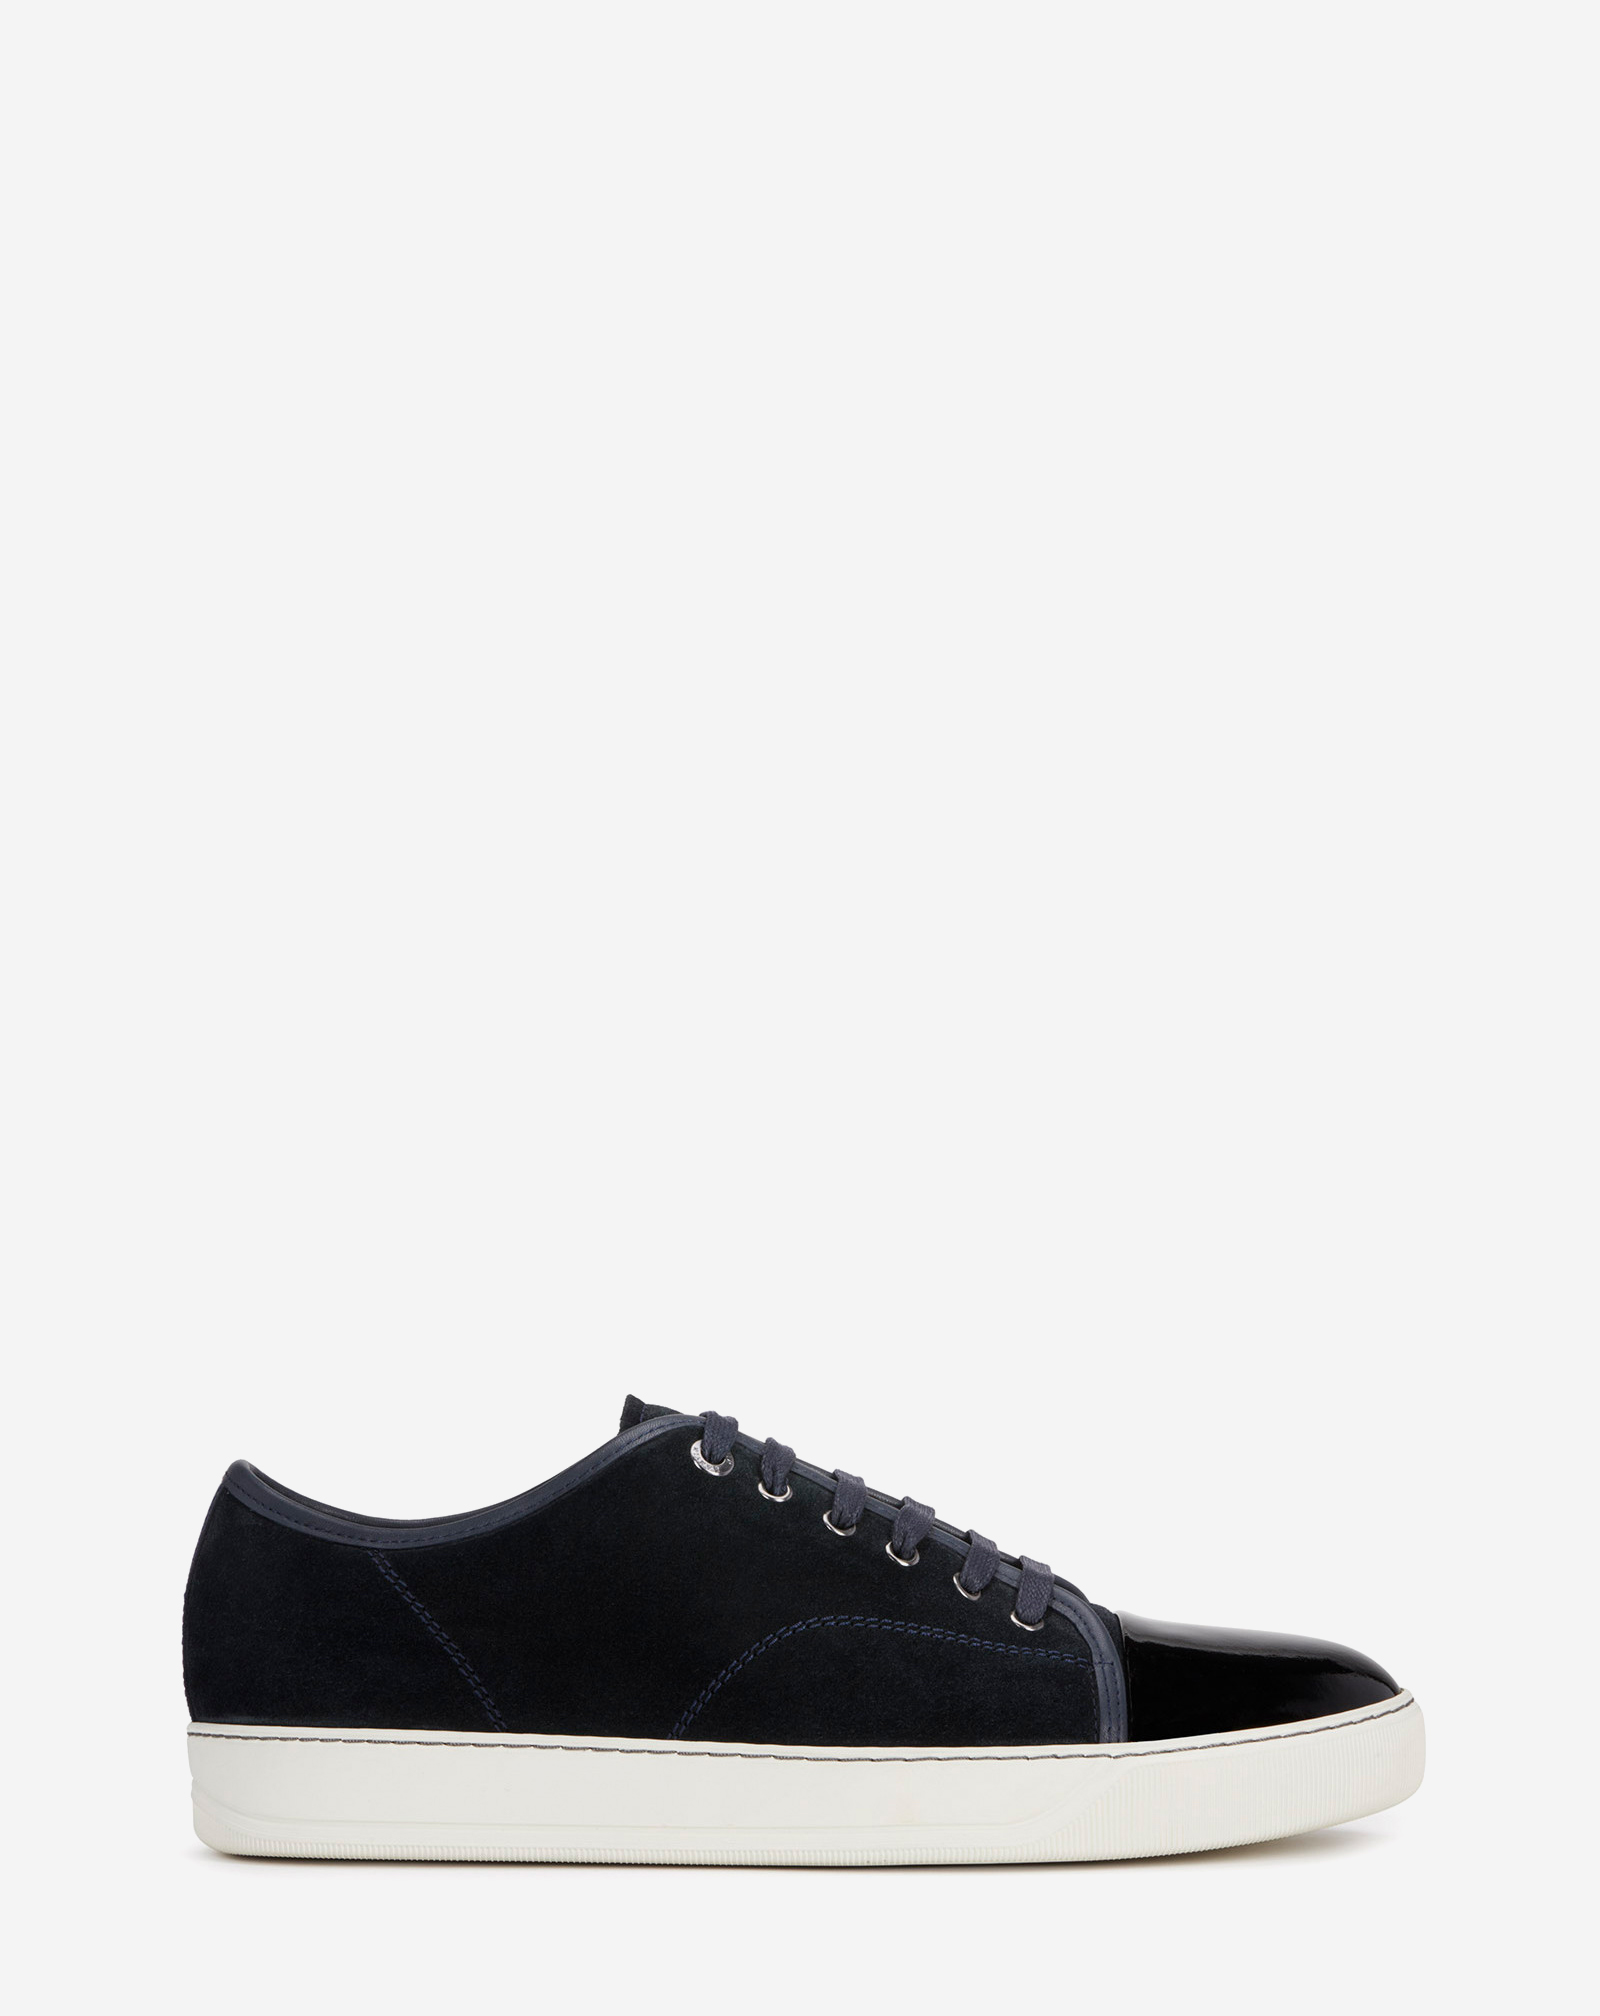 Lanvin Dbb1 Suede And Patent Leather Trainers For Men In Navy Blue